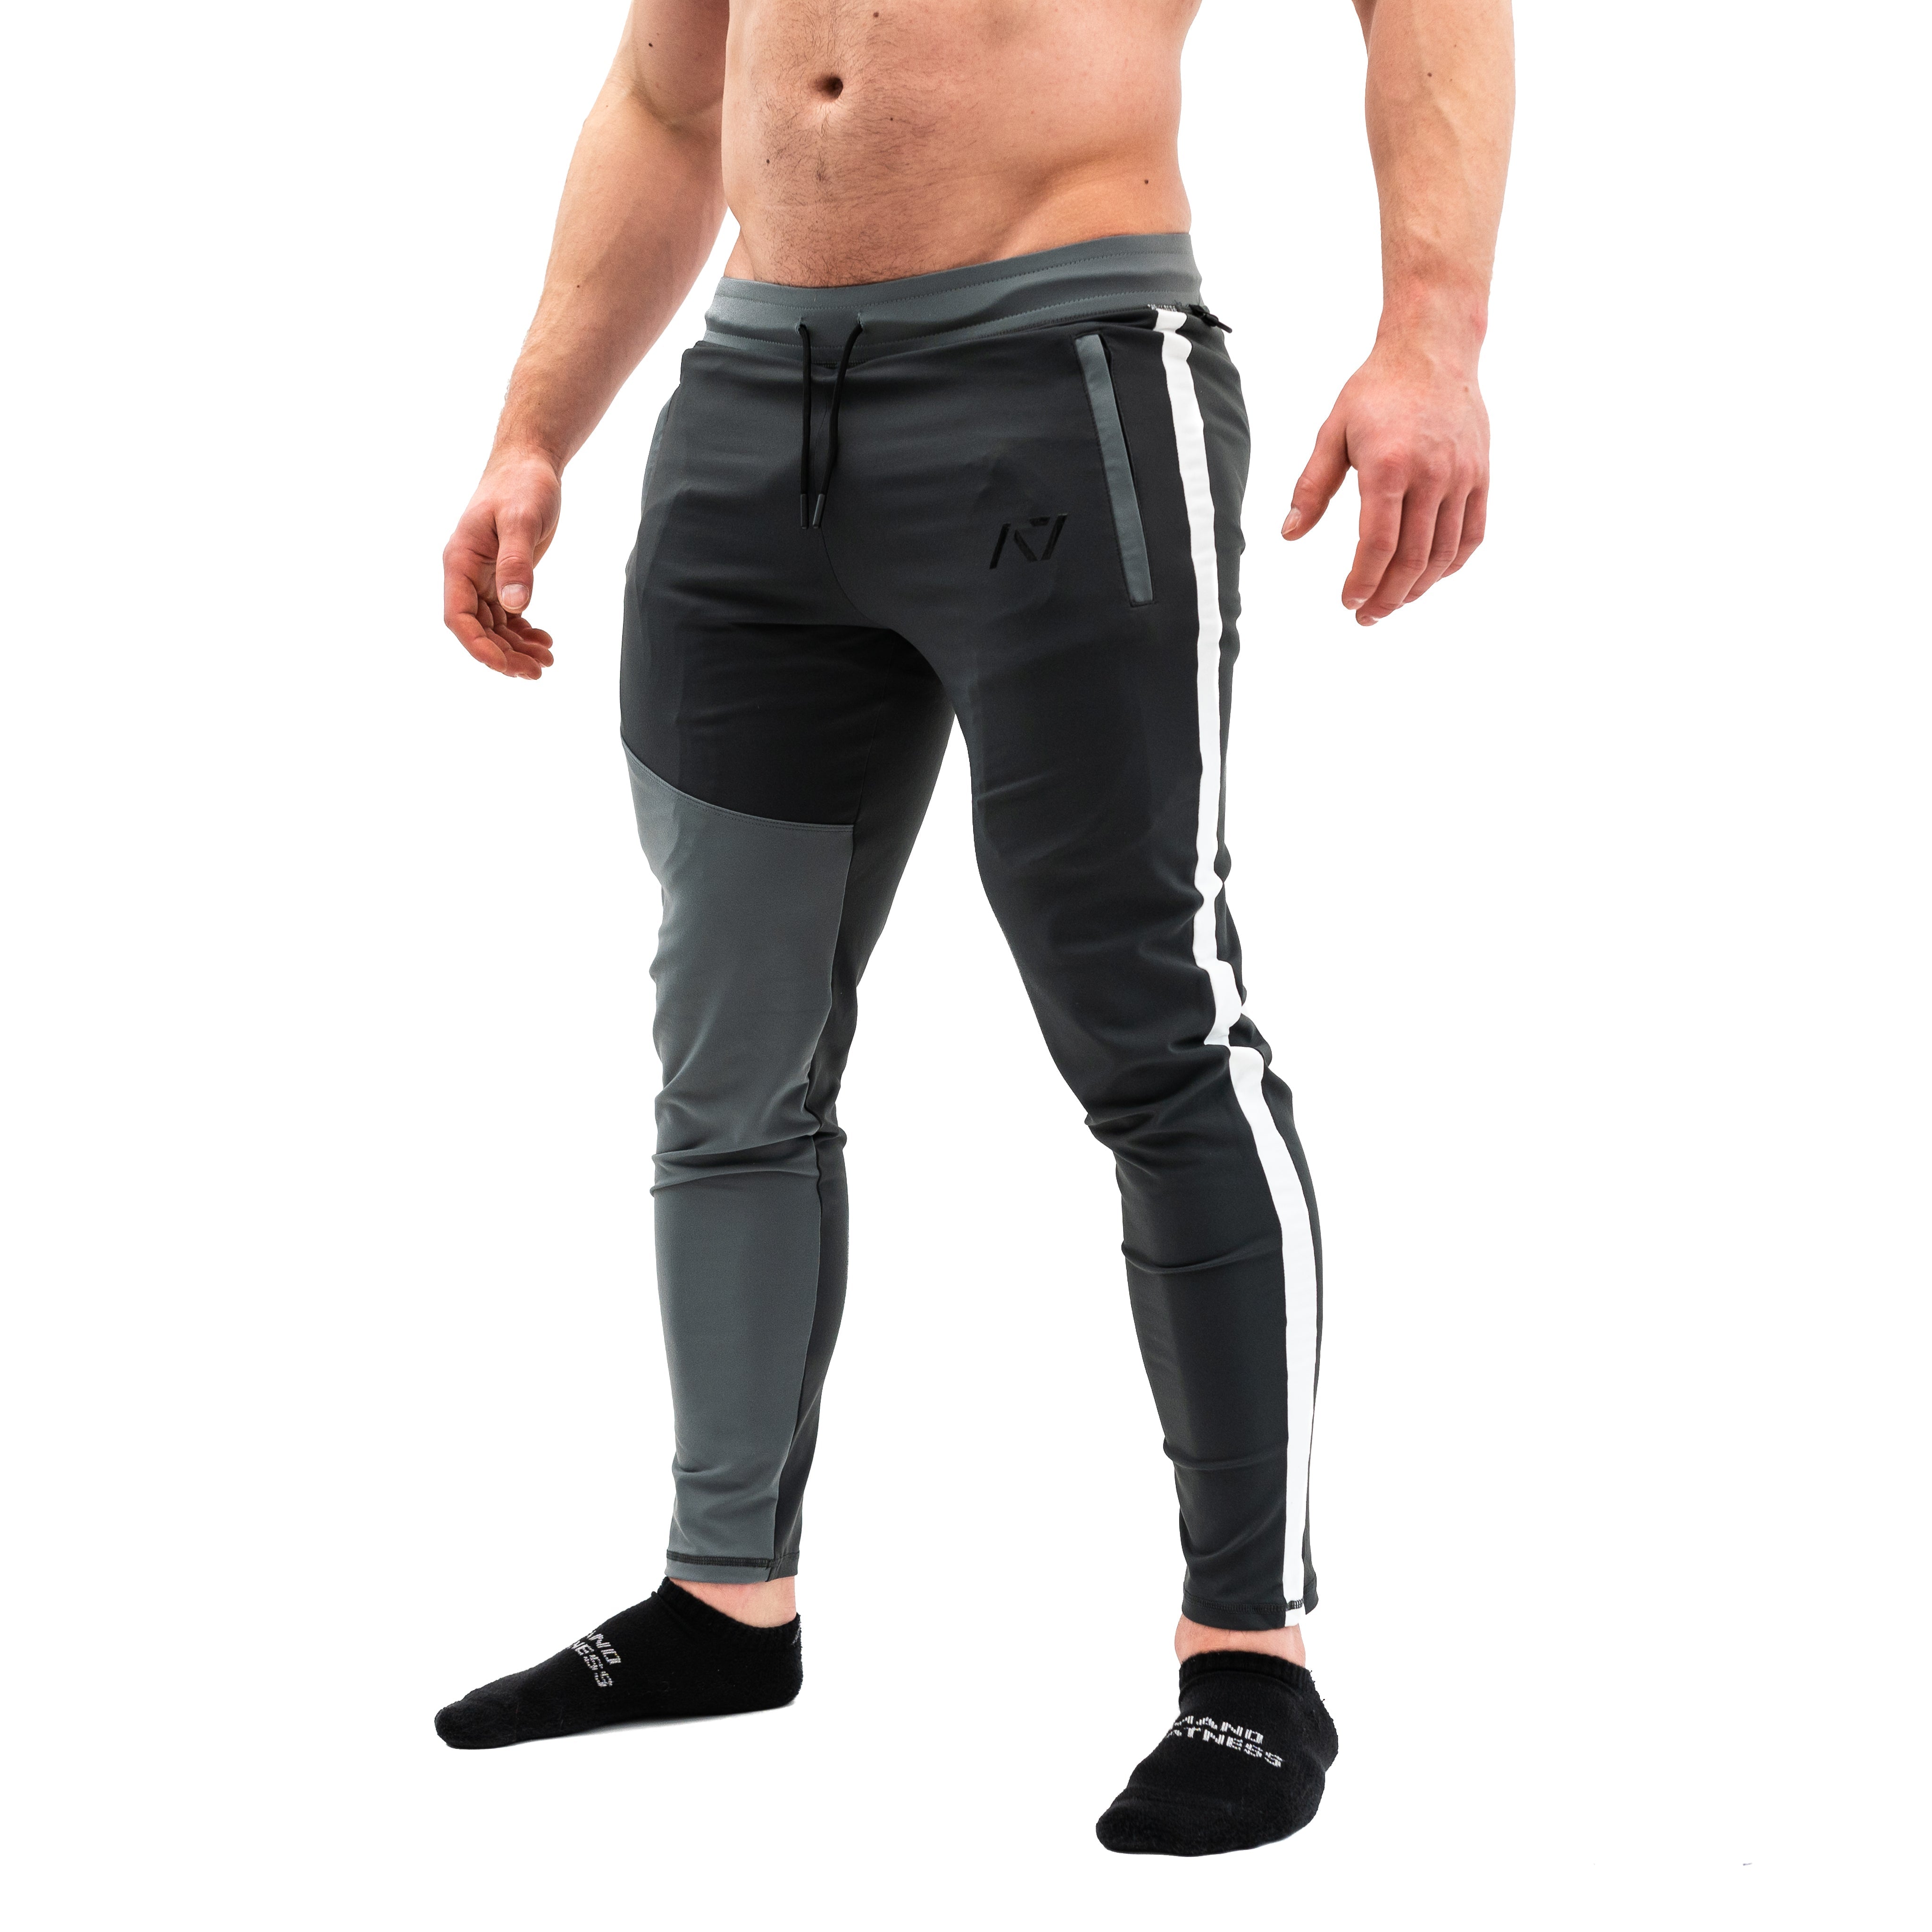 Defy Joggers have likely become a staple in your wardrobe. With our newest chromium design colourway we set out to provide a unique yet simple chromium colour combo to match with all the stealth, grey, white and even more poppy colours of your current collection or many of the pieces we have available. You can purchase chromium defy joggers from A7 UK or A7 Europe. A7 UK shipping to UK, Ireland, France, Italy, Germany, the Netherlands, Sweden and Poland.